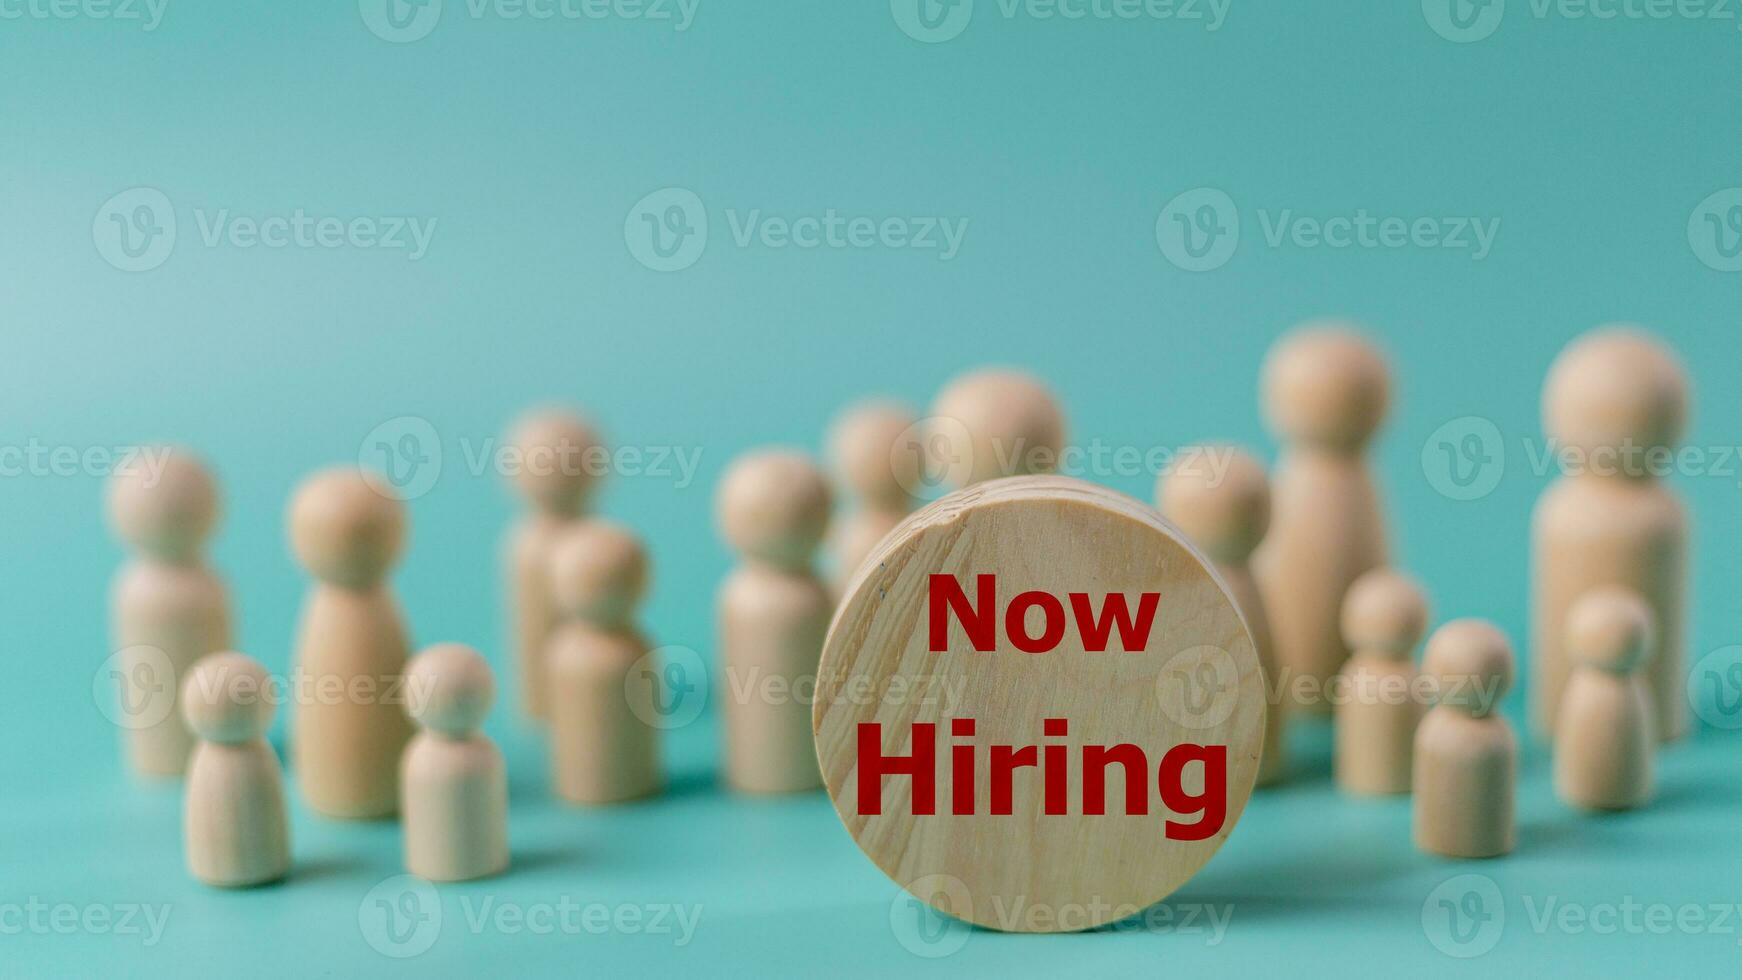 The concept is now hiring. Wooden figures of people and the word NOW HIRING. Business concept photo